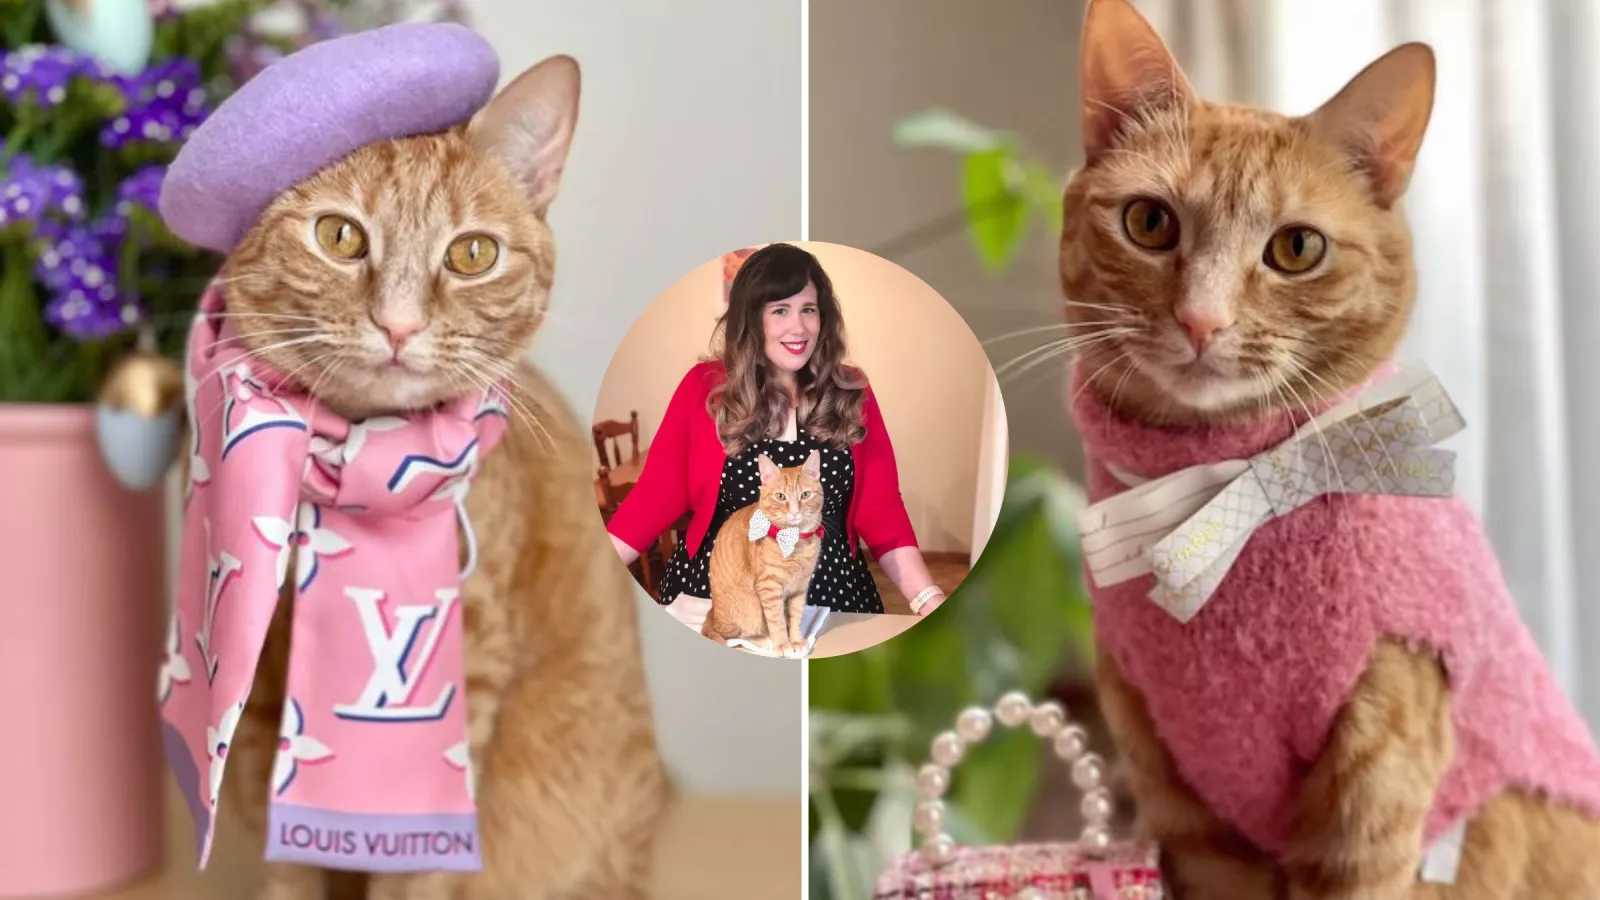 Woman Shows Off Rescue Cat's 'Princess Bedroom' and $5K Designer